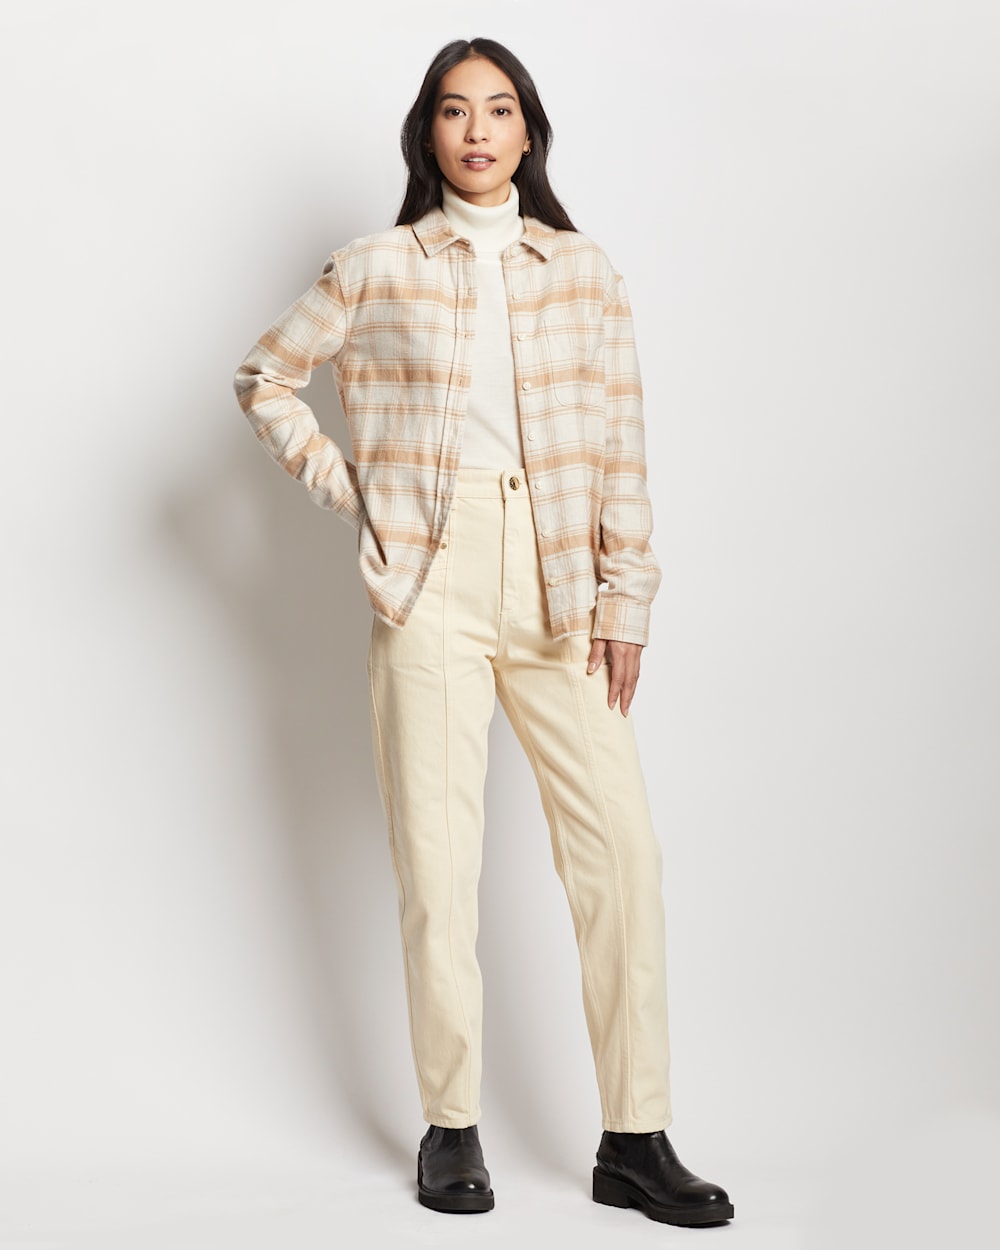 WOMEN'S BOYFRIEND DOUBLEBRUSHED FLANNEL SHIRT IN IVORY/TAN PLAID image number 1